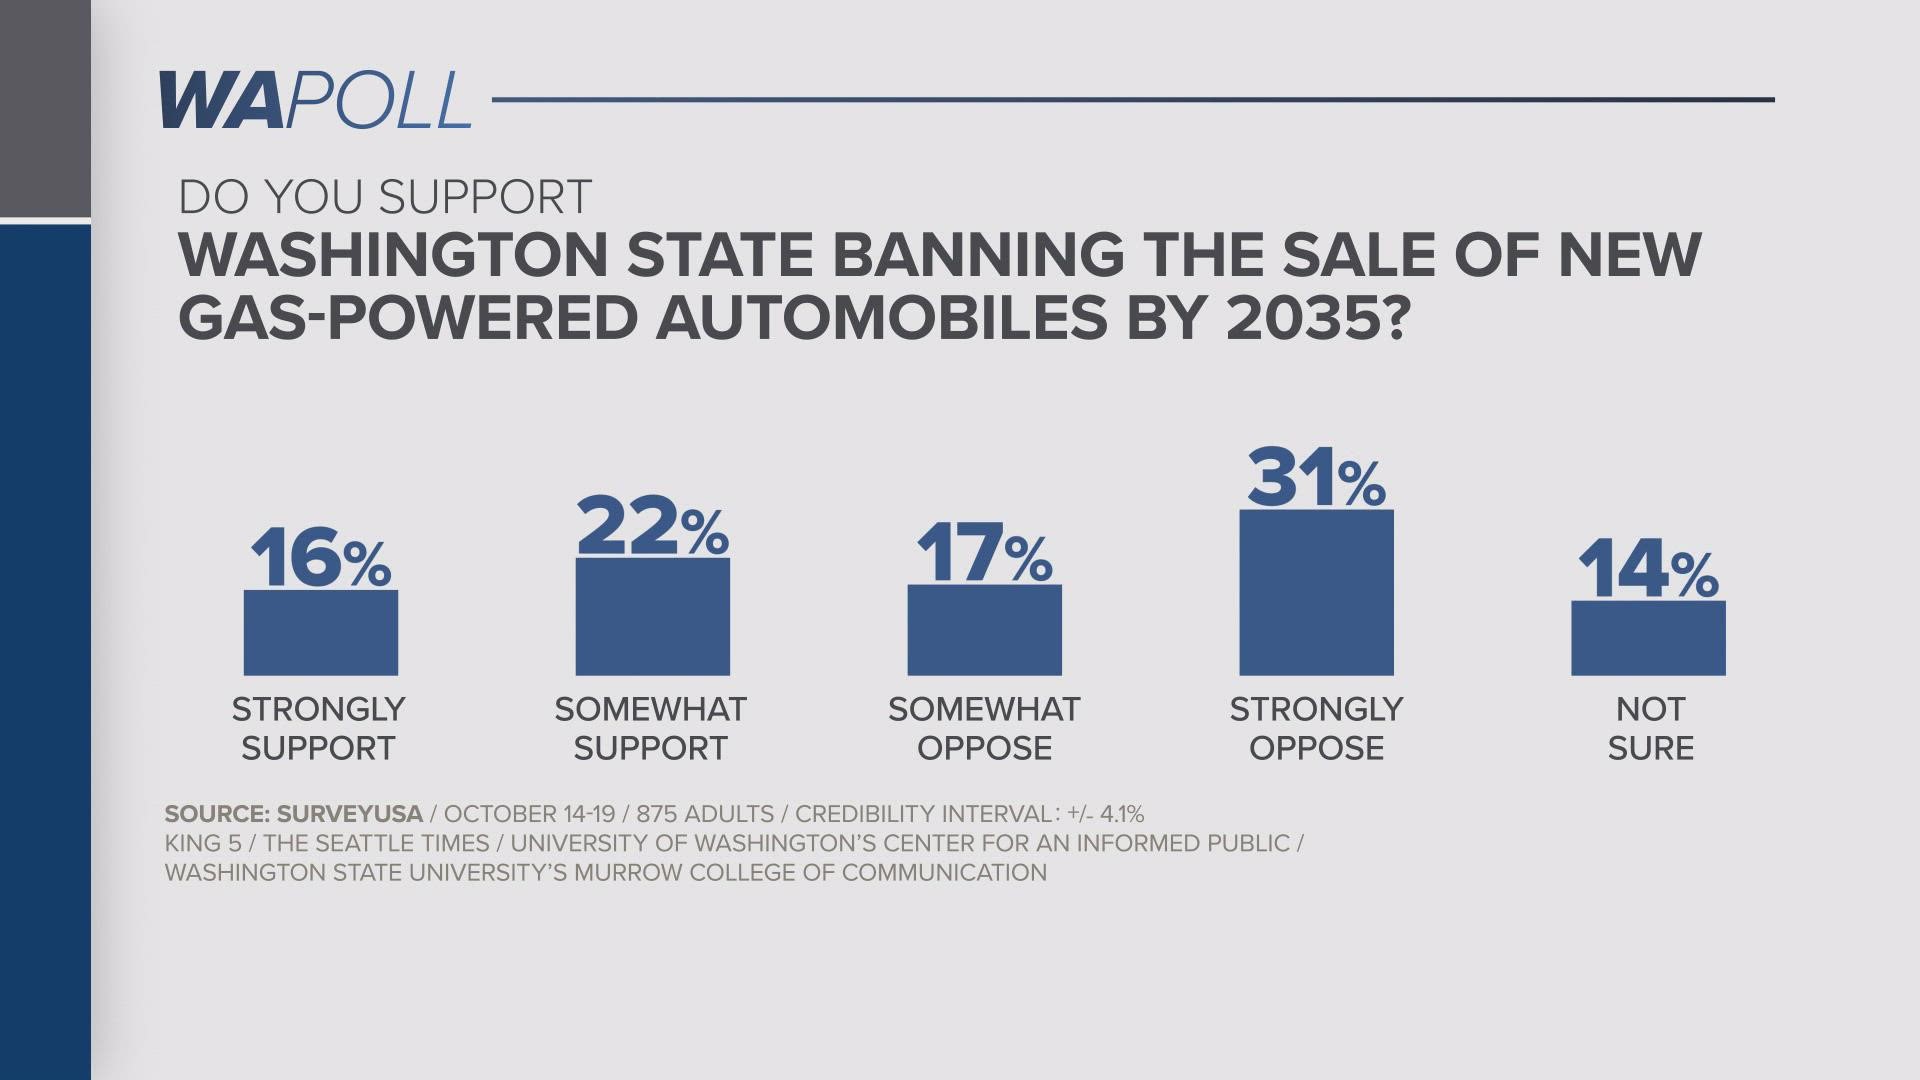 Washington Governor Jay Inslee says the state is poised to adopt regulations that would ban the sale of new gas-powered vehicles by 2035.